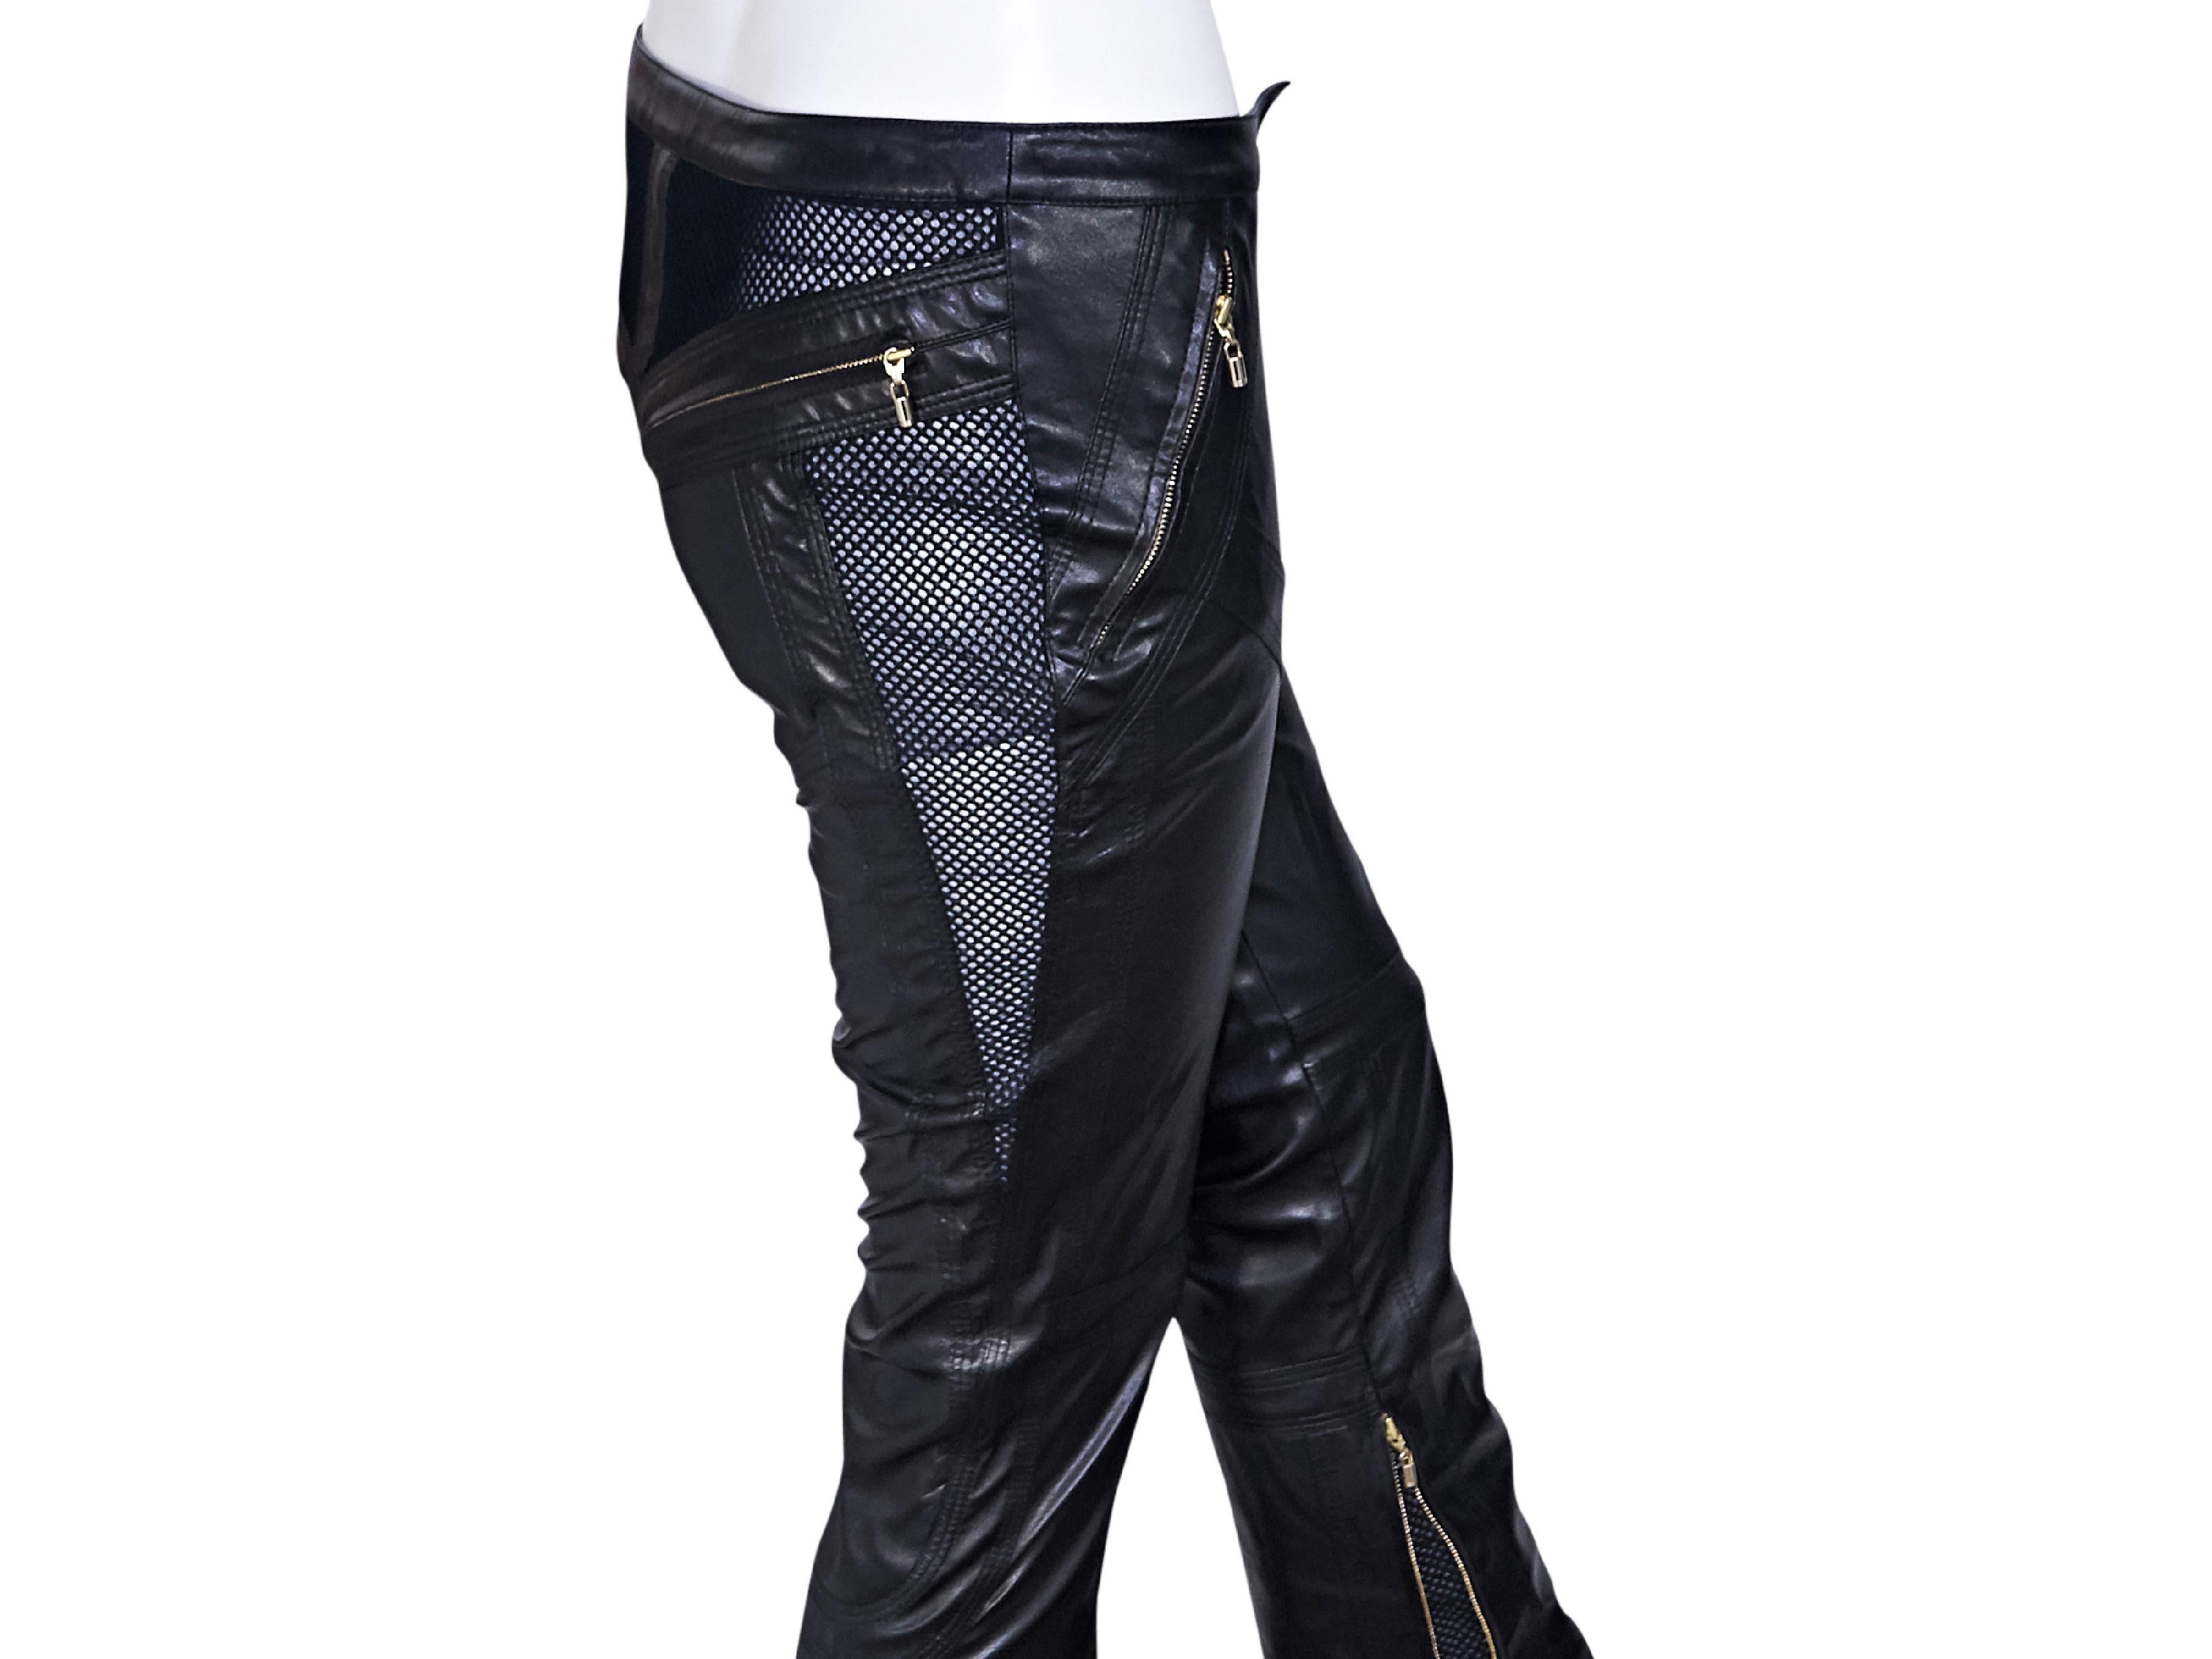 Women's Black Gianni Versace Couture Leather Pants